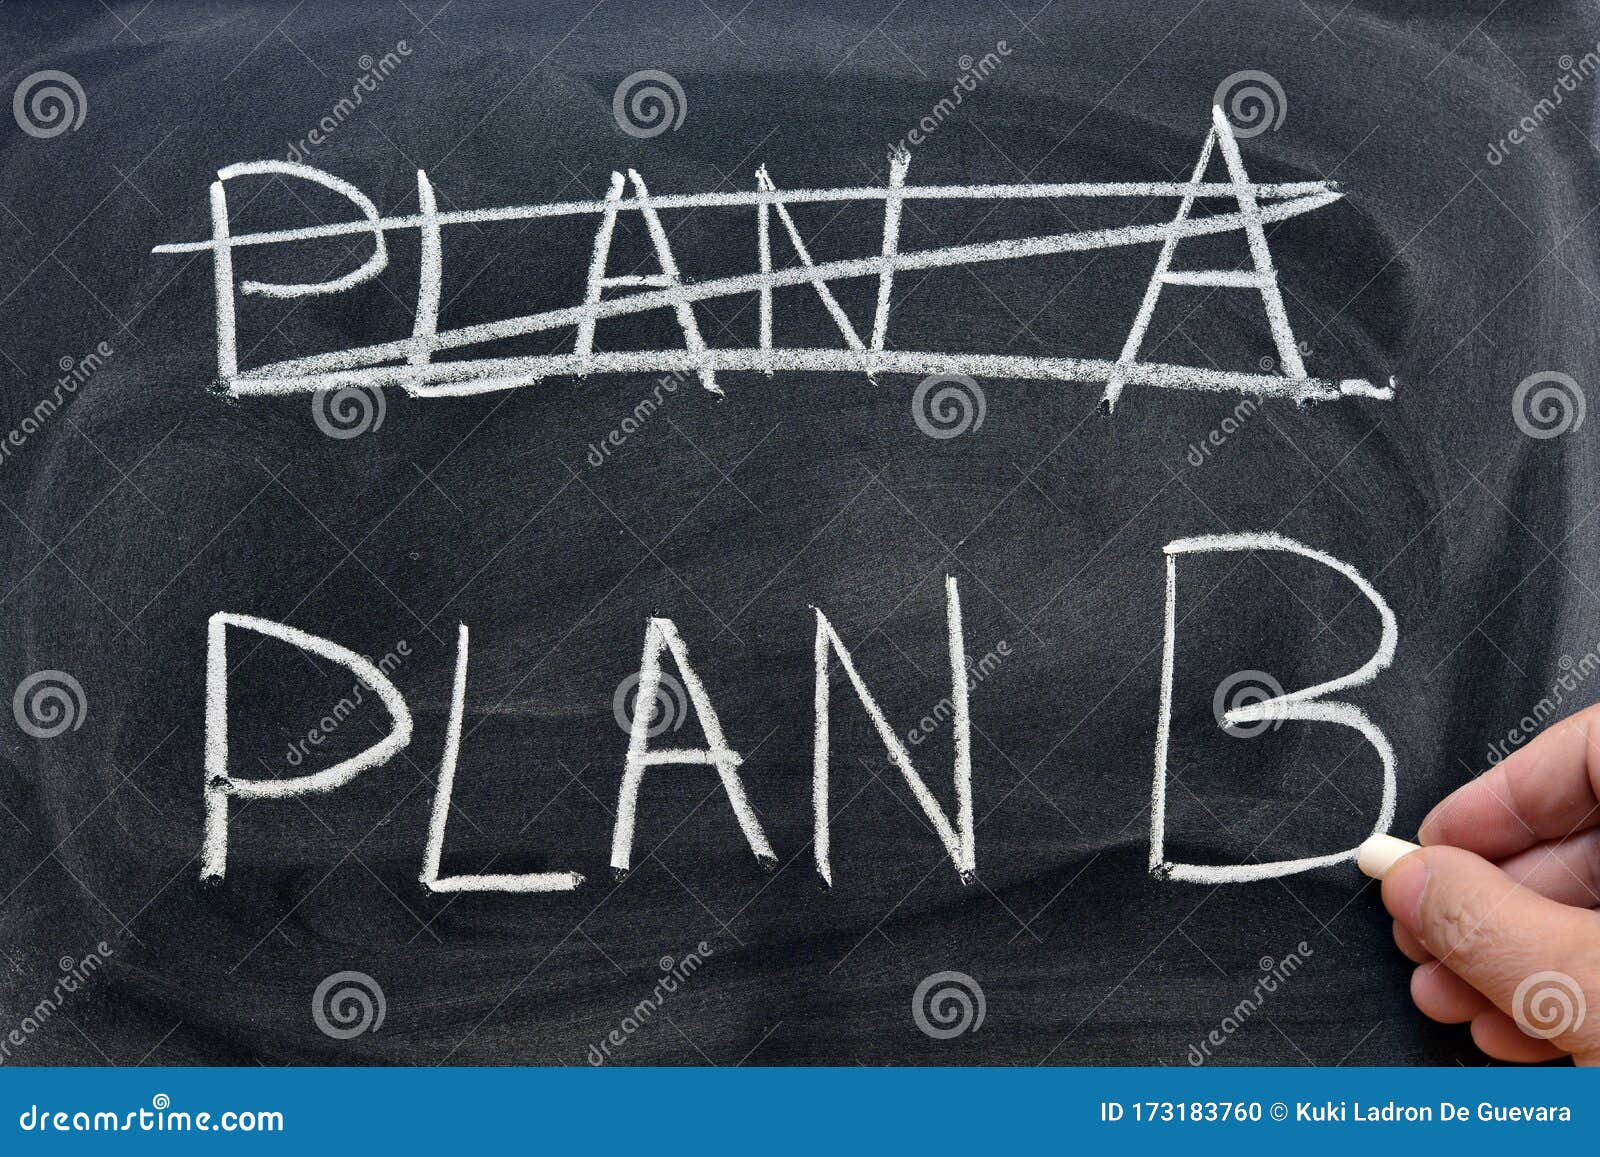 plan a crossed out and plan b written with a chalk on the blackboard